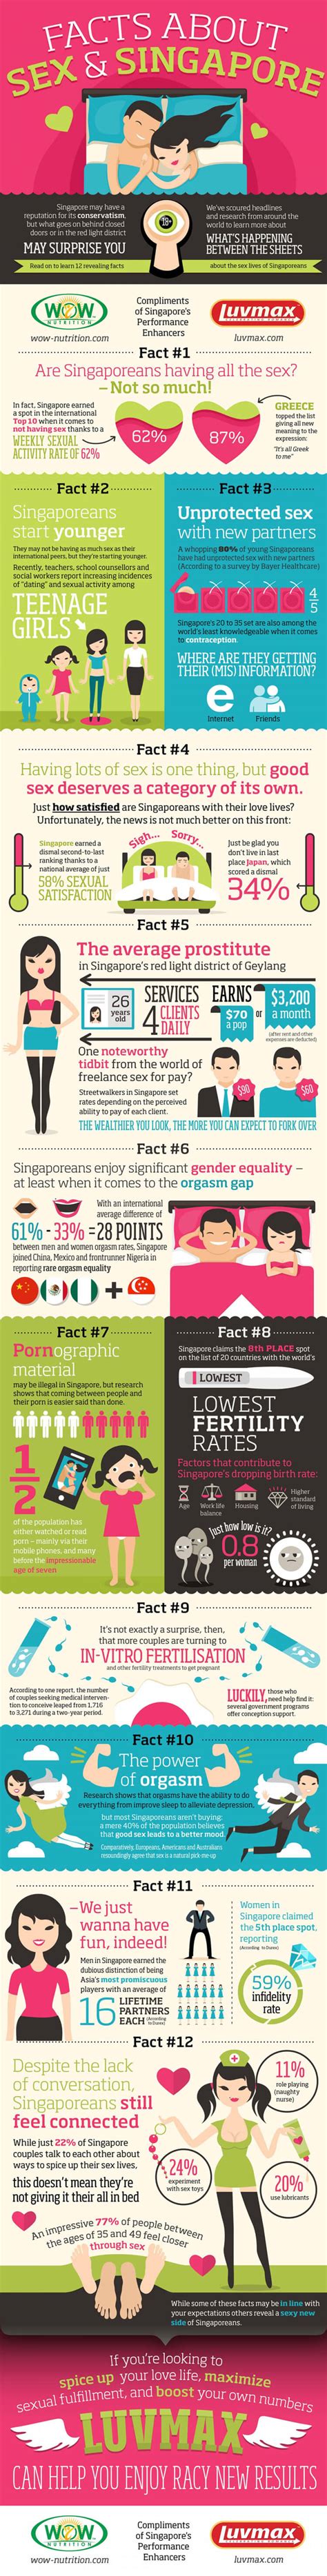 Facts About Sex Singapore Infographic 16280 The Best Porn Website